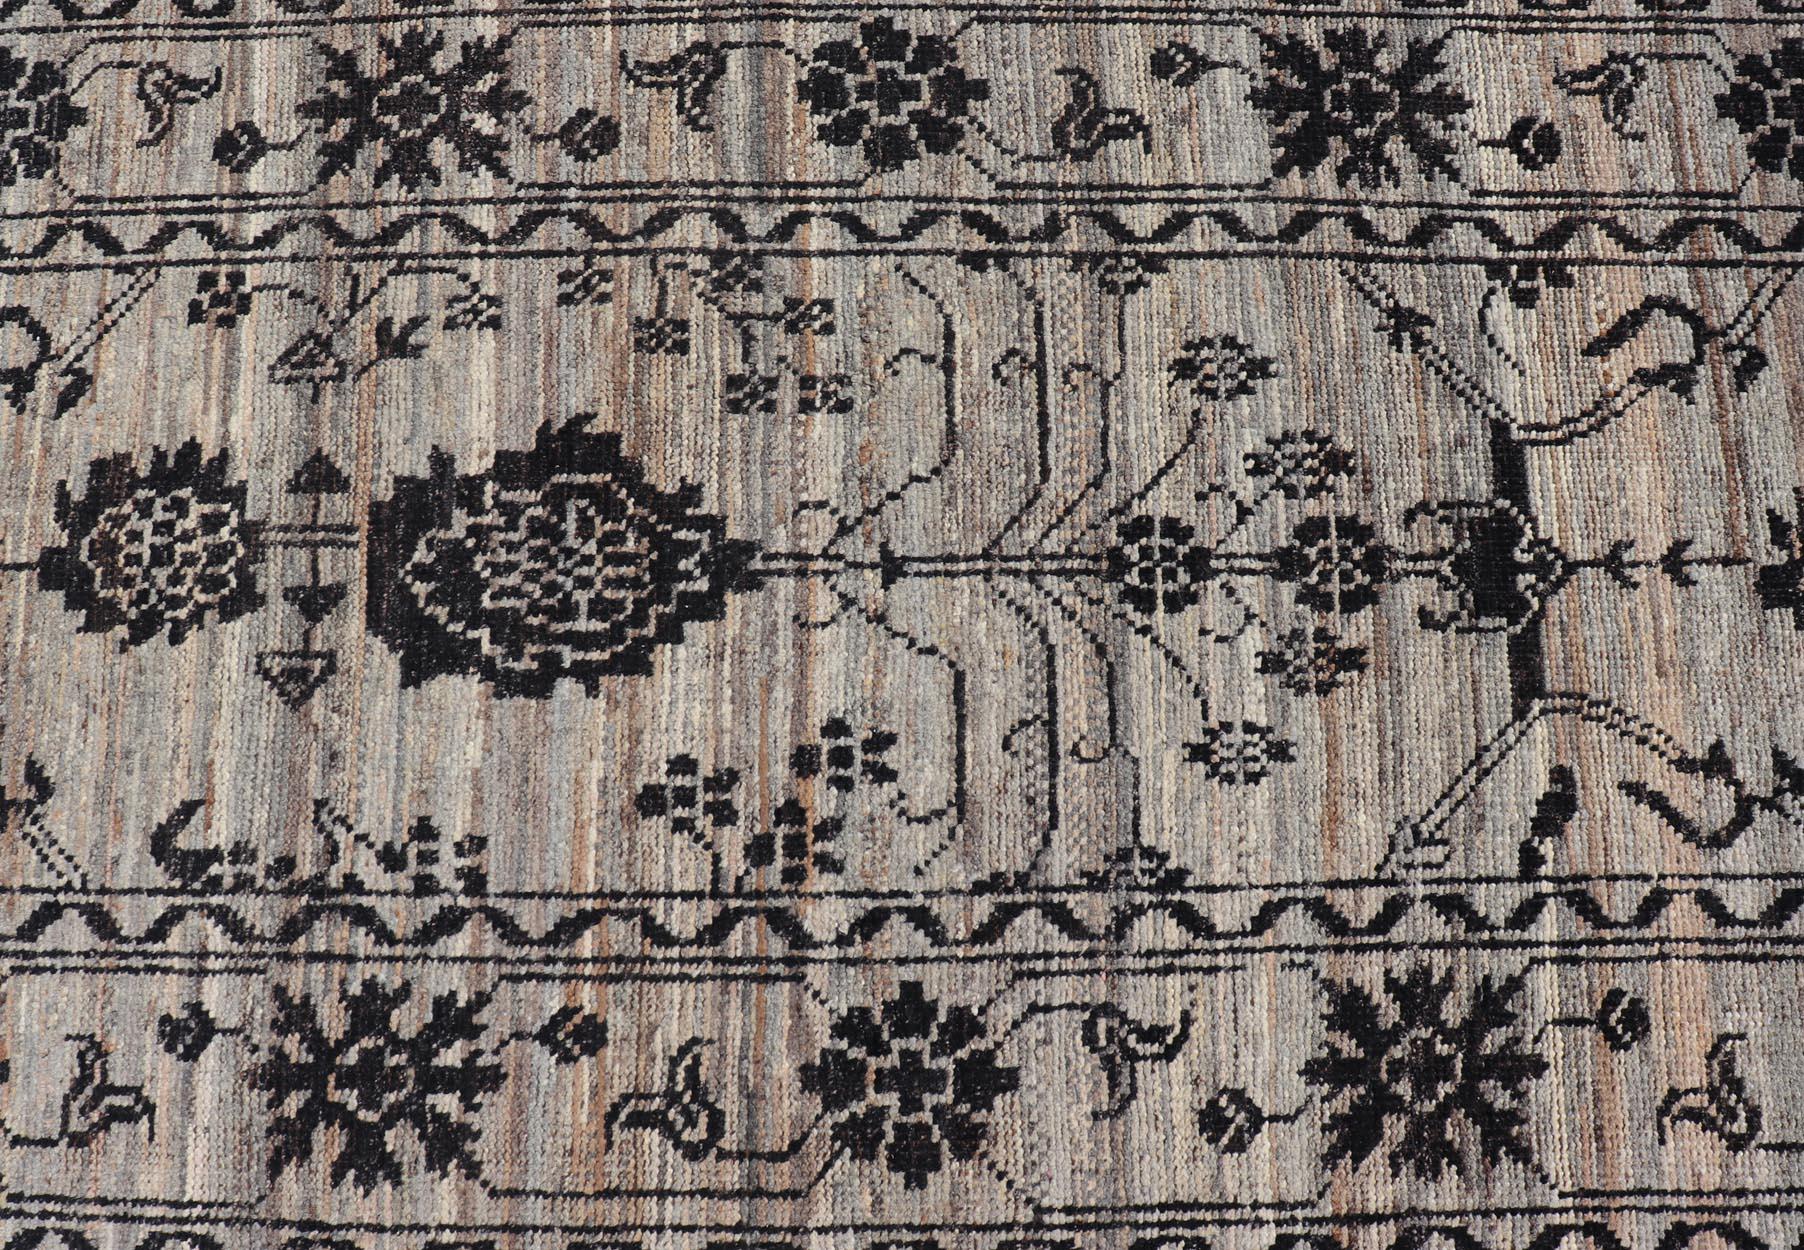 This modern oushak designed tribal rug has been hand-knotted. The rug features a modern sub-geometric Oushak design, replete with various motifs in charcoal on an earthy tone background and enclosed within a complementary border; making this rug a